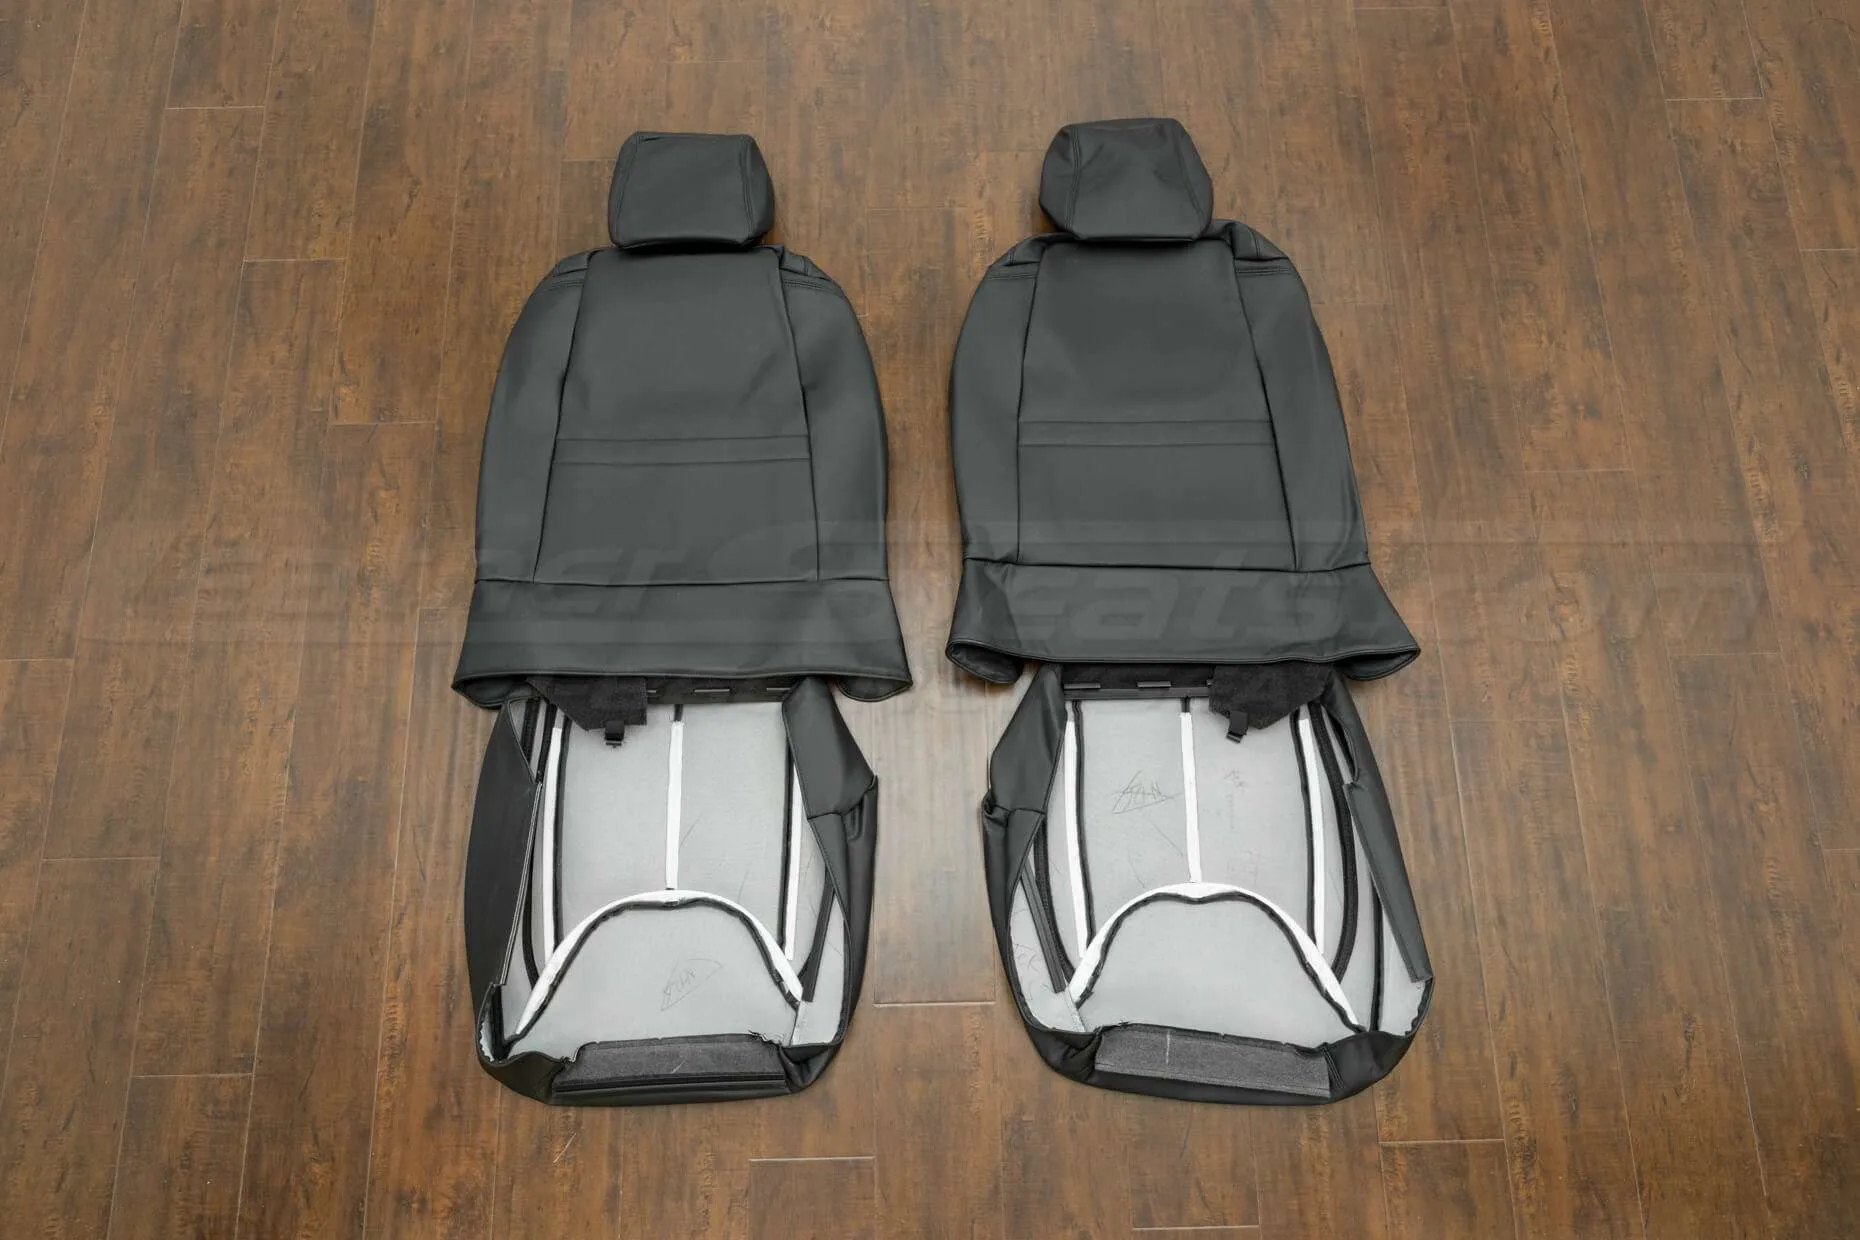 Jeep Wrangler Leather Seats - Black - Back of front seats